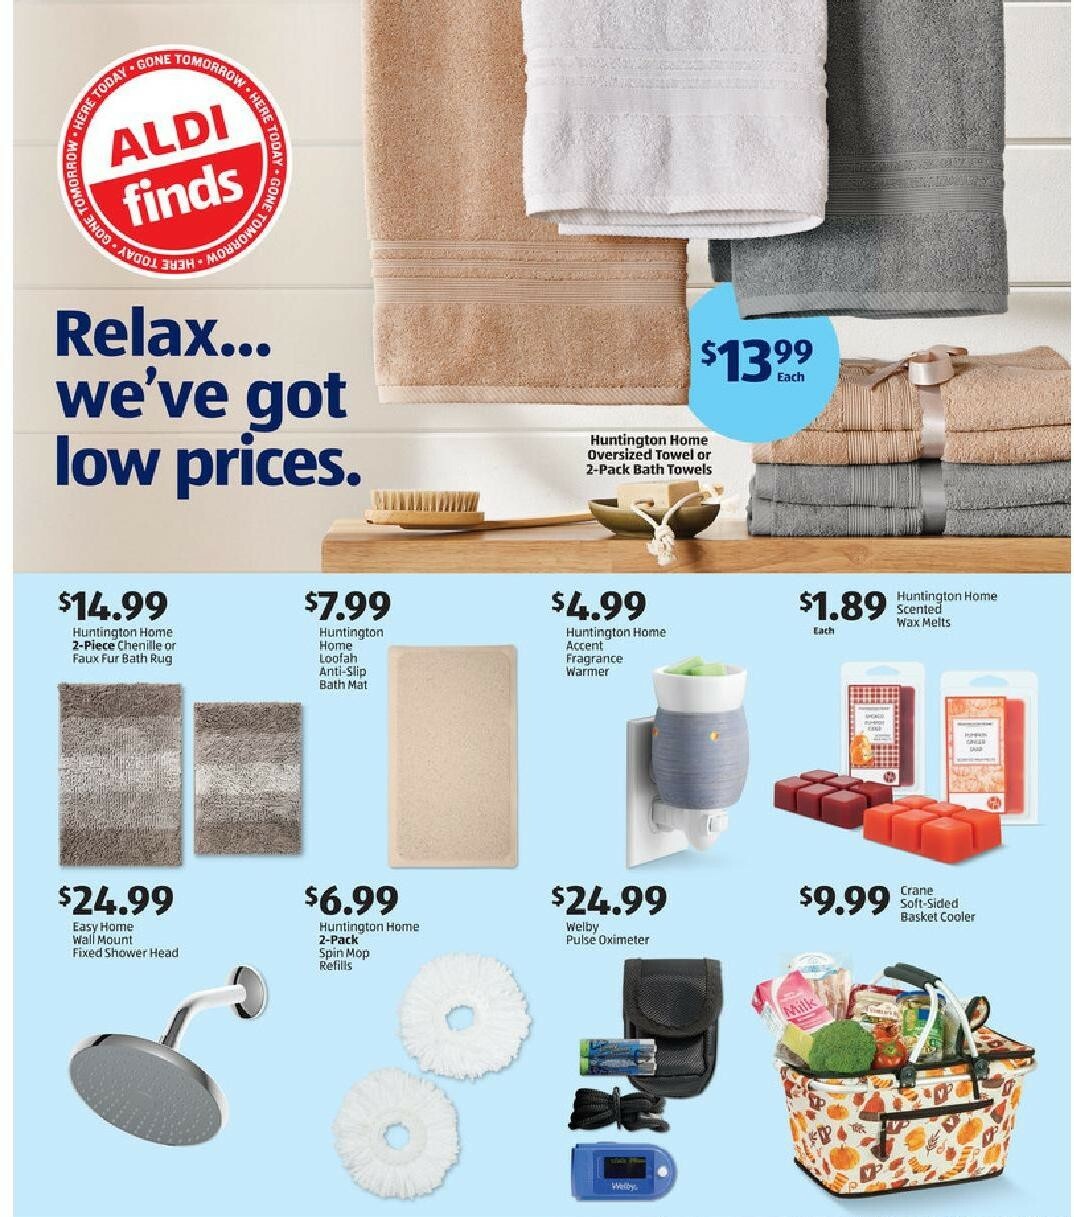 ALDI Weekly Ad from October 16